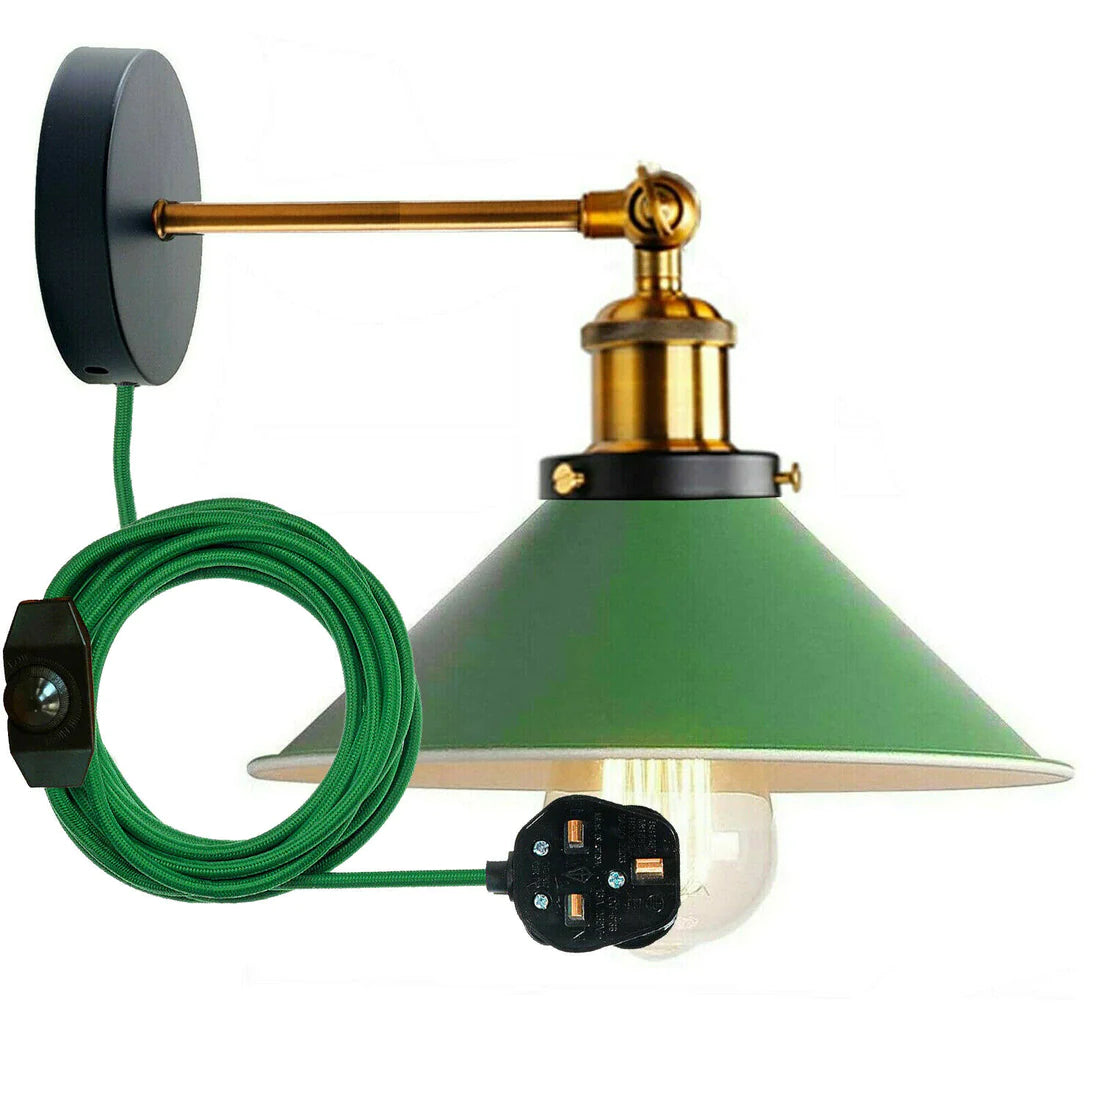 green plug in wall light dimmer switch fabric braided wall sconce